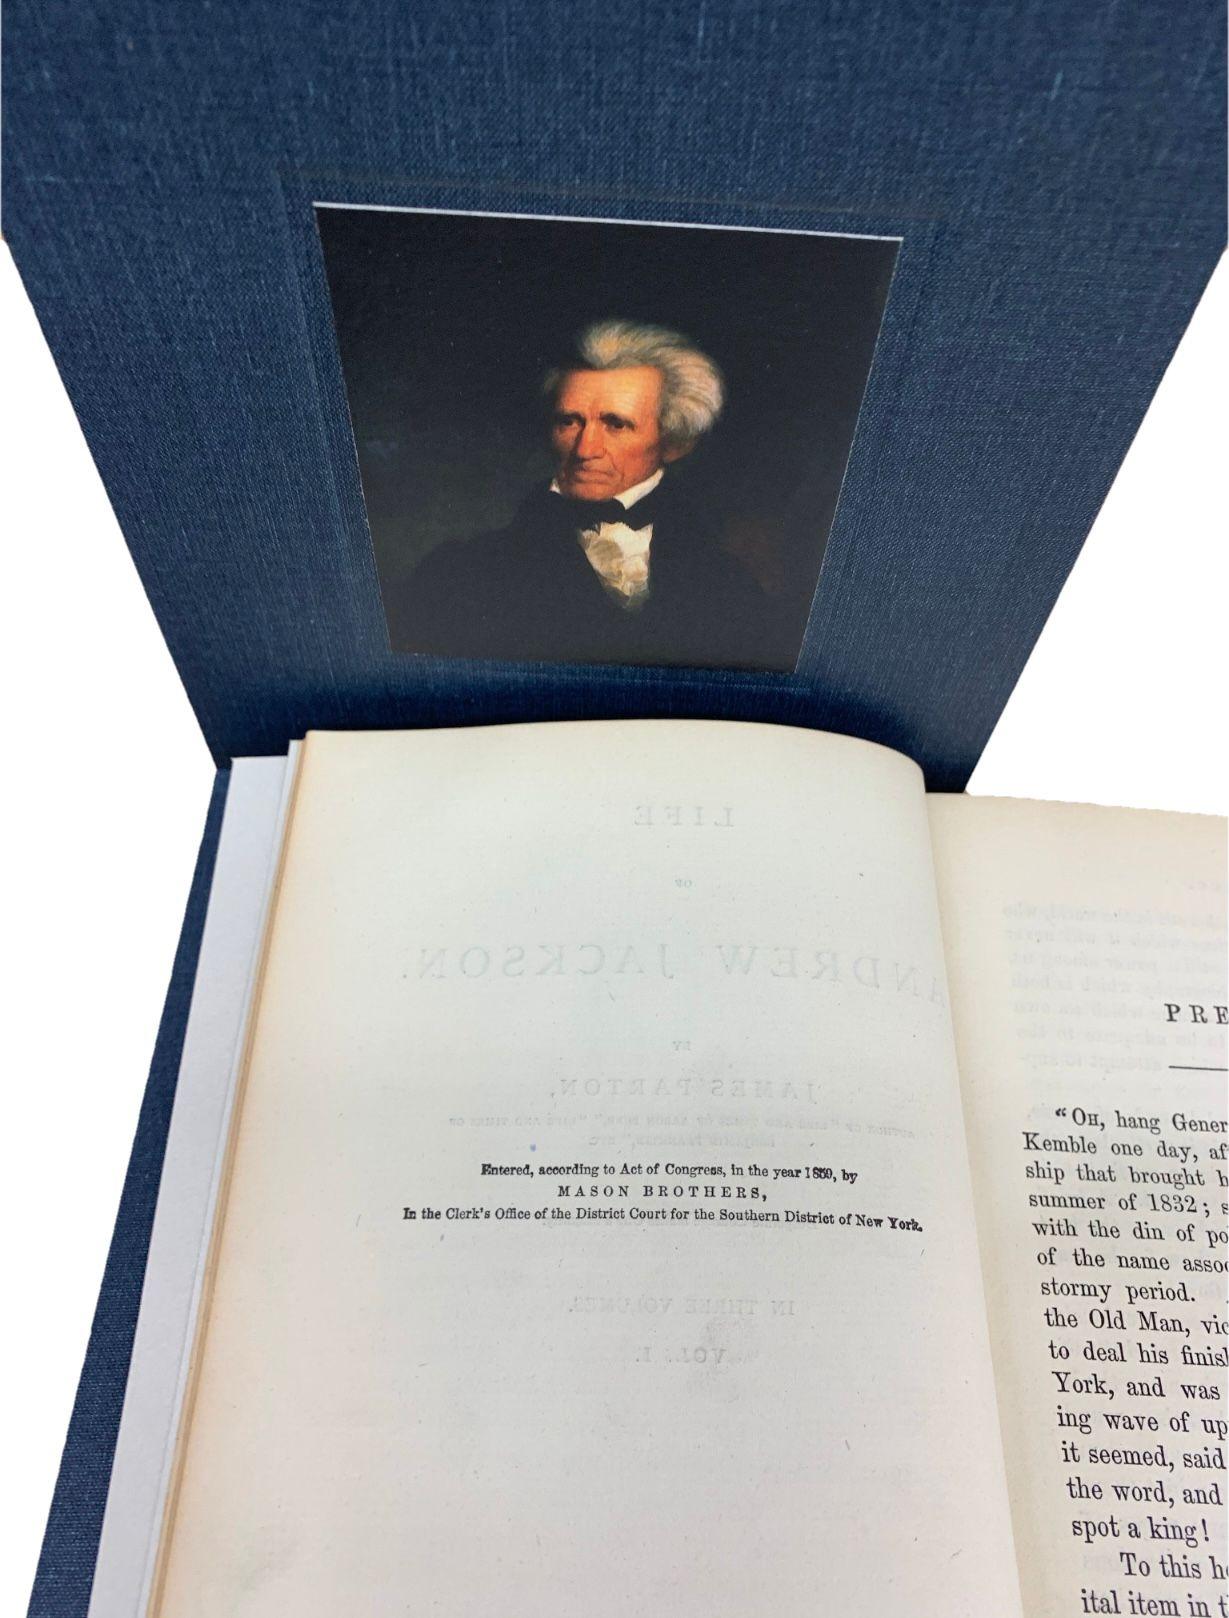 North American Life of Andrew Jackson by James Parton 3-Volume Leather Set, 1876 For Sale